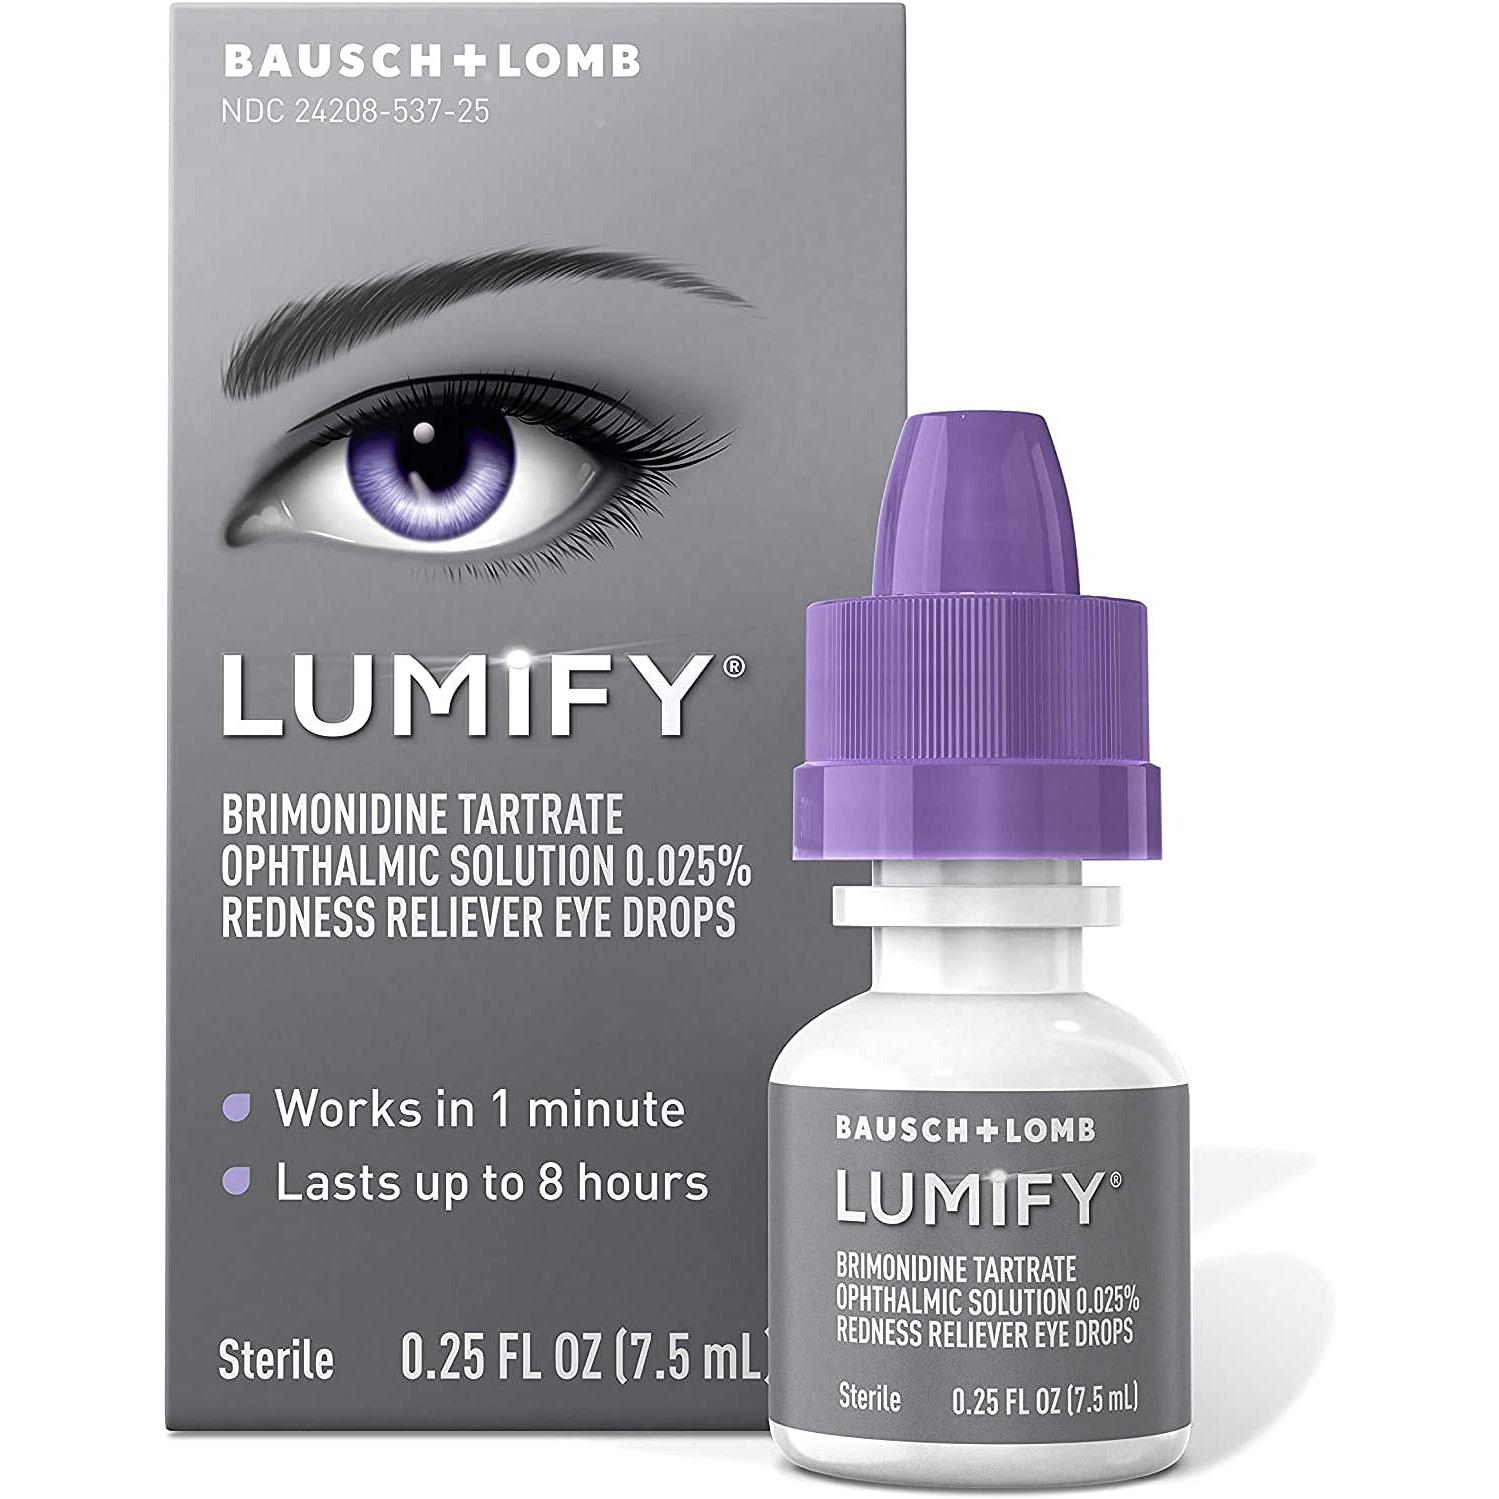 Lumify Redness Reliever Eye Drops for $14.57 Shipped